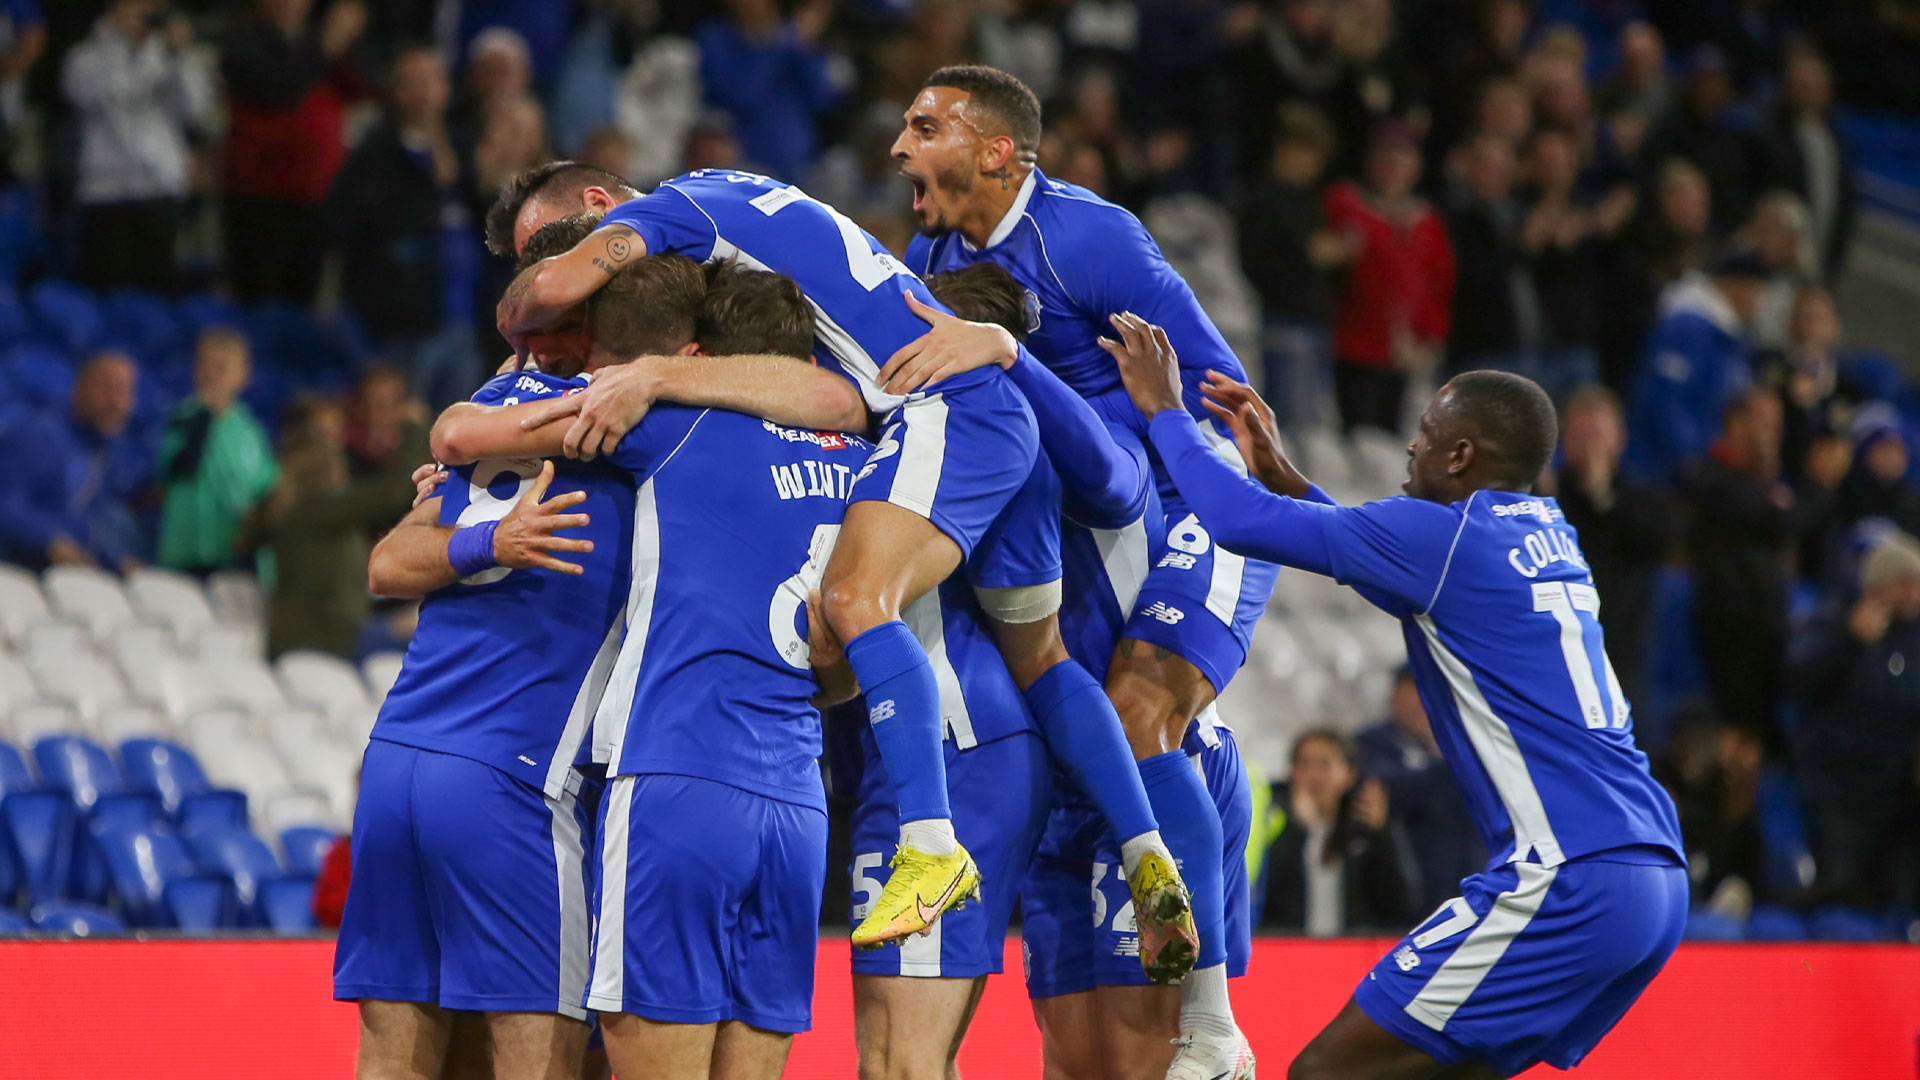 Cardiff City celebrate taking the lead against Coventry City